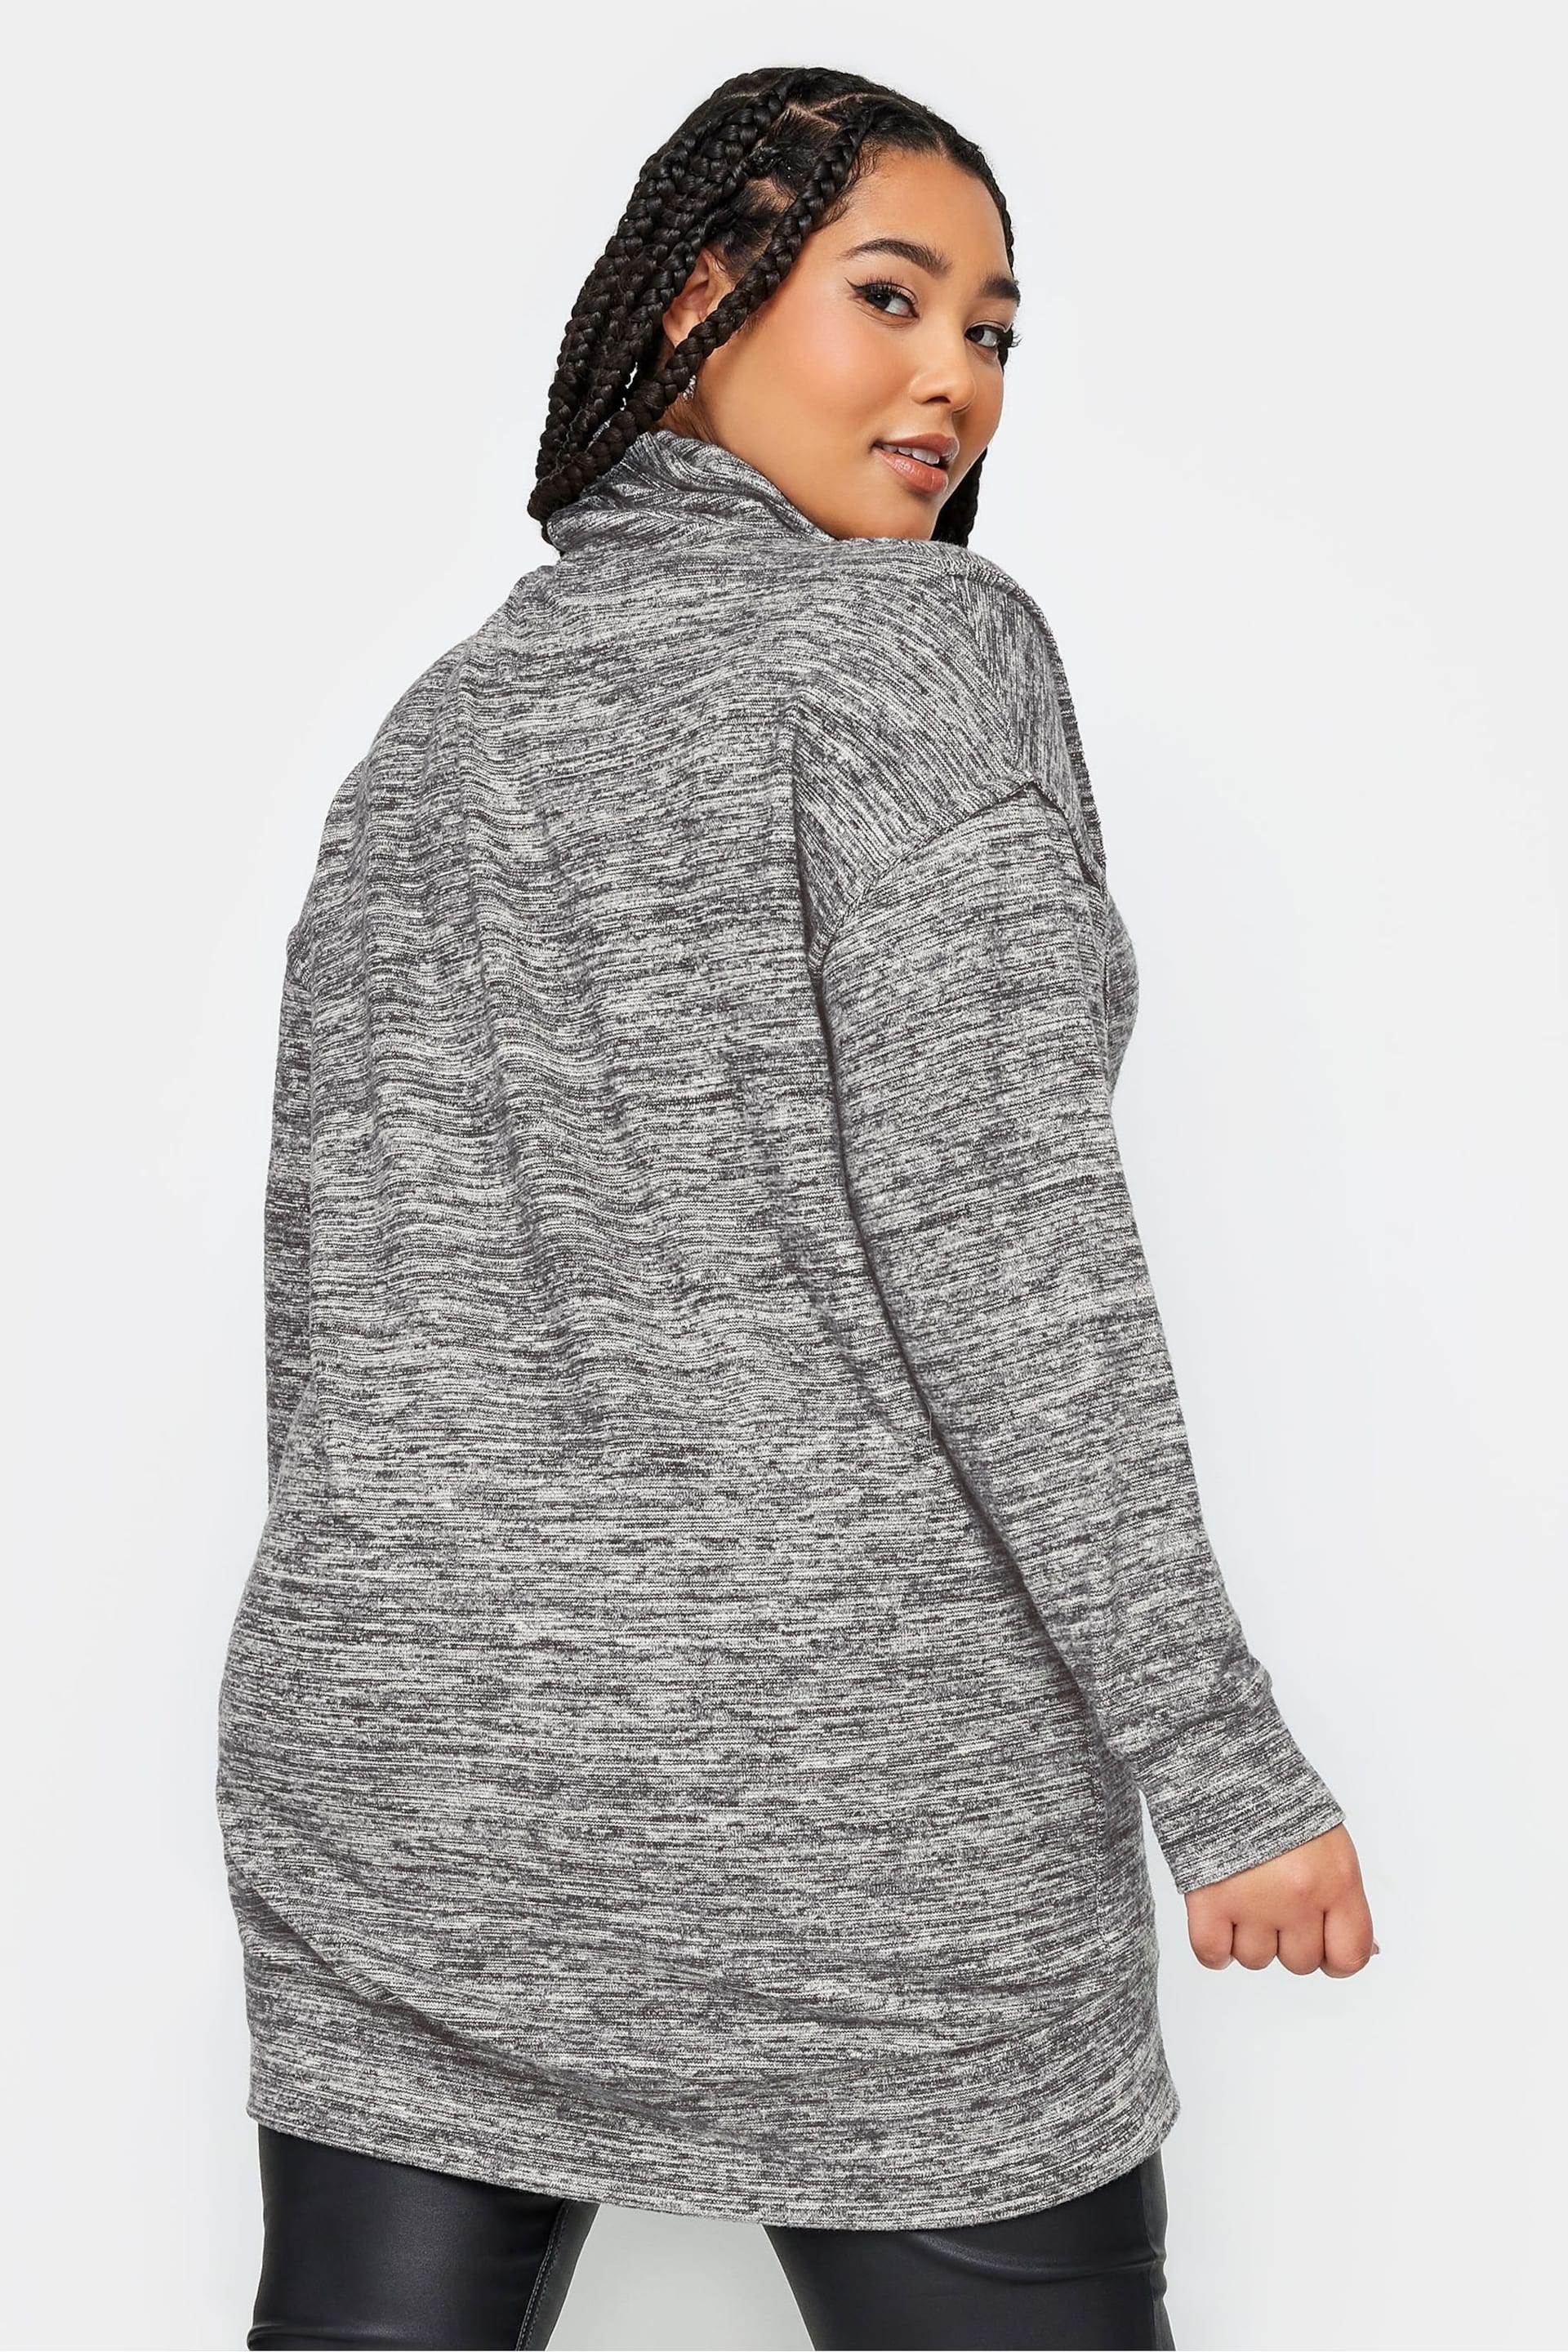 Yours Curve Grey Soft Touch Turtleneck Sweatshirt - Image 2 of 4